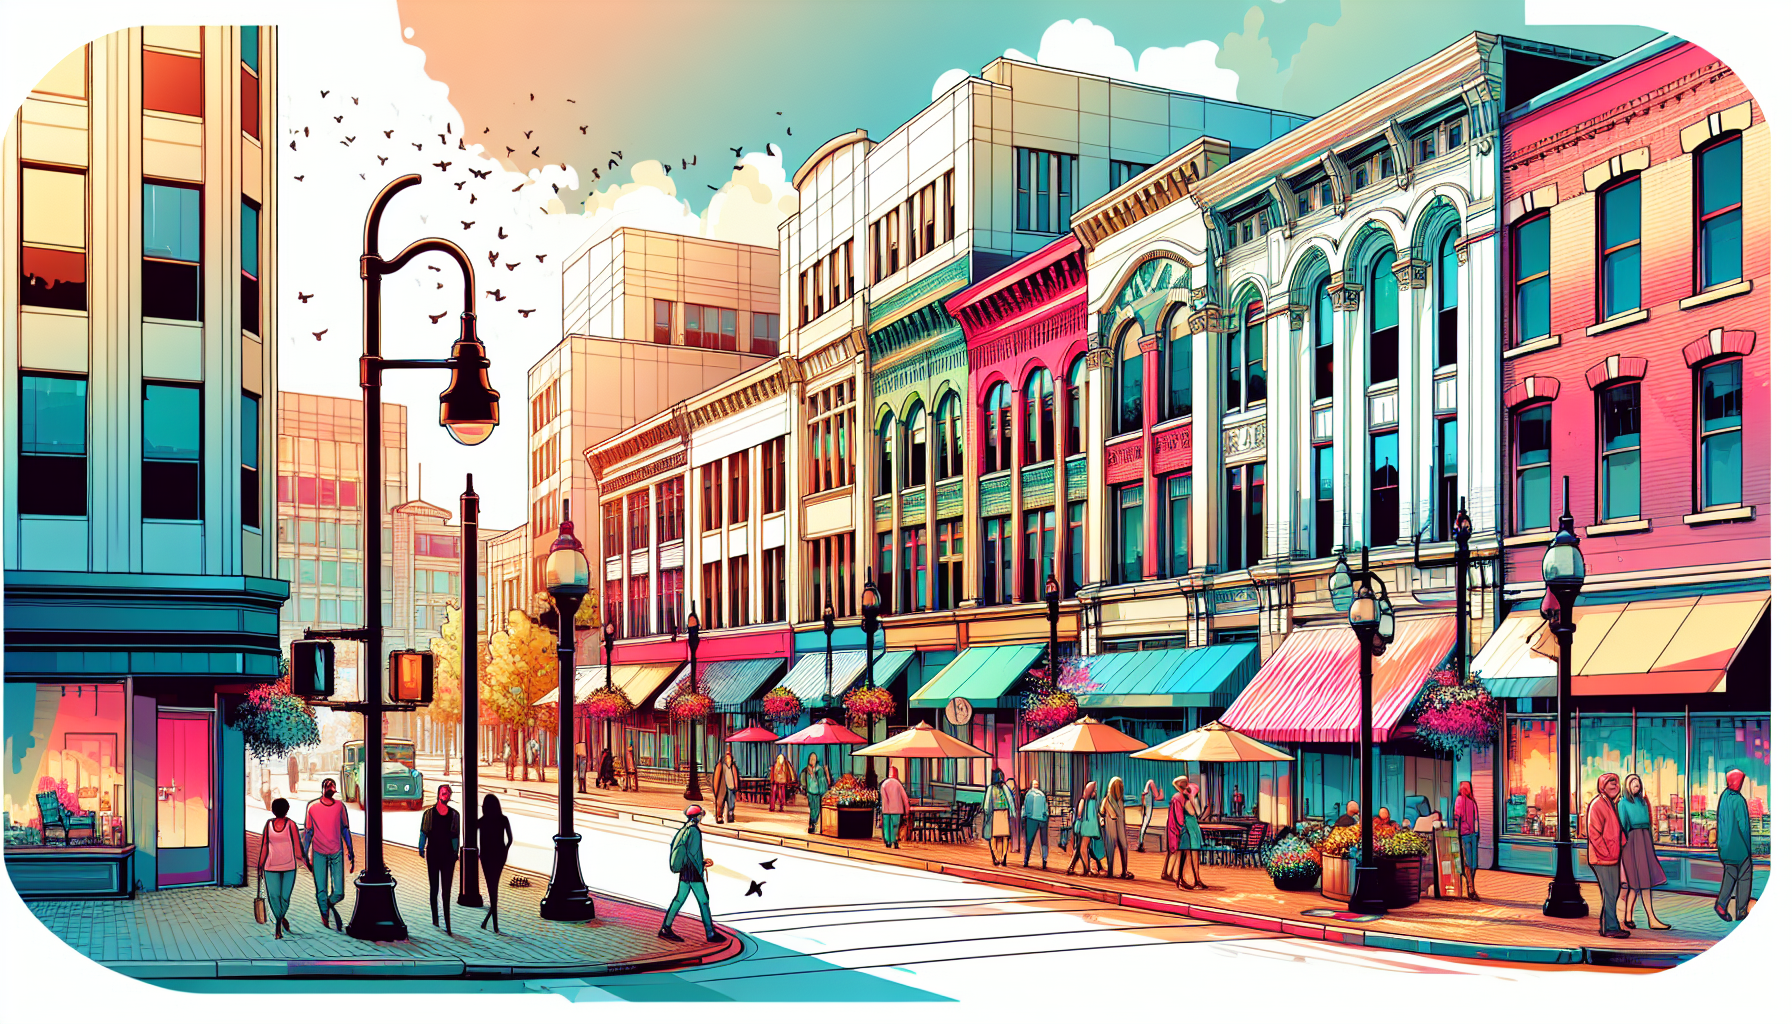 Create an image of a quaint downtown street in Birmingham, Michigan bustling with activity from its local shops, cafes, and pedestrians, capturing the vibrant and welcoming atmosphere of this charming